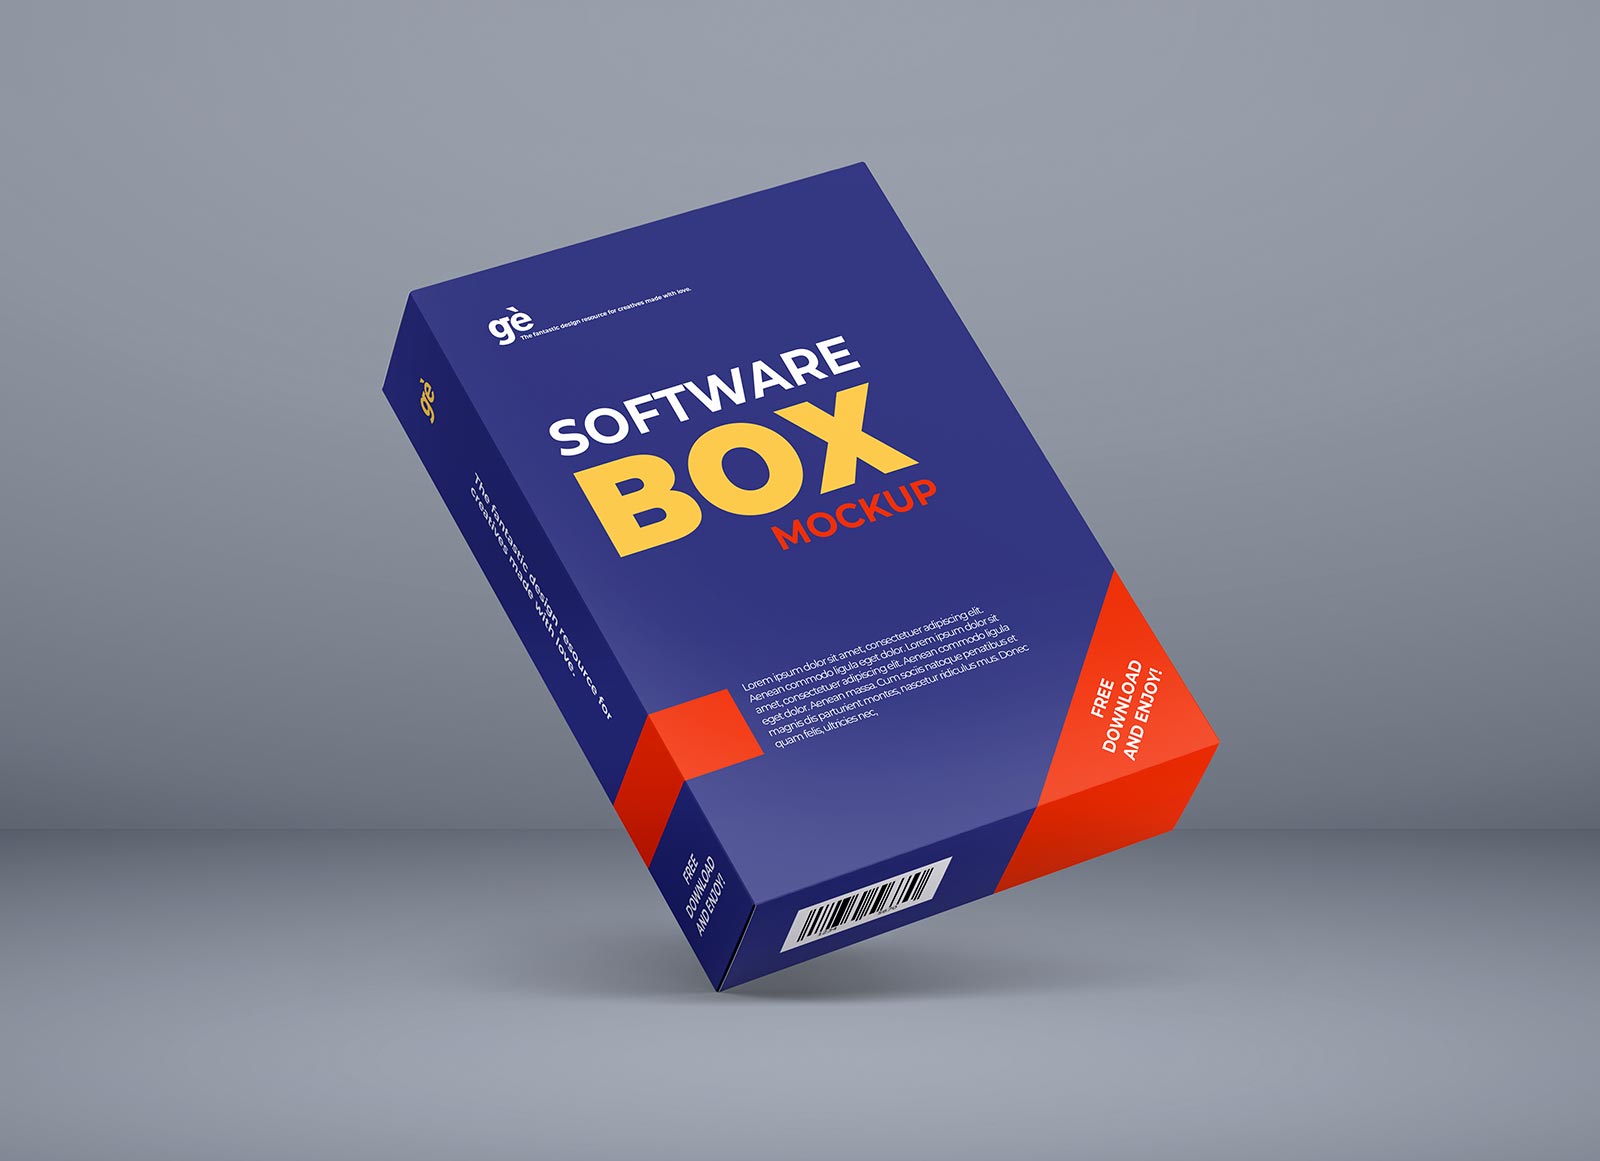 Mockup free download for software Idea